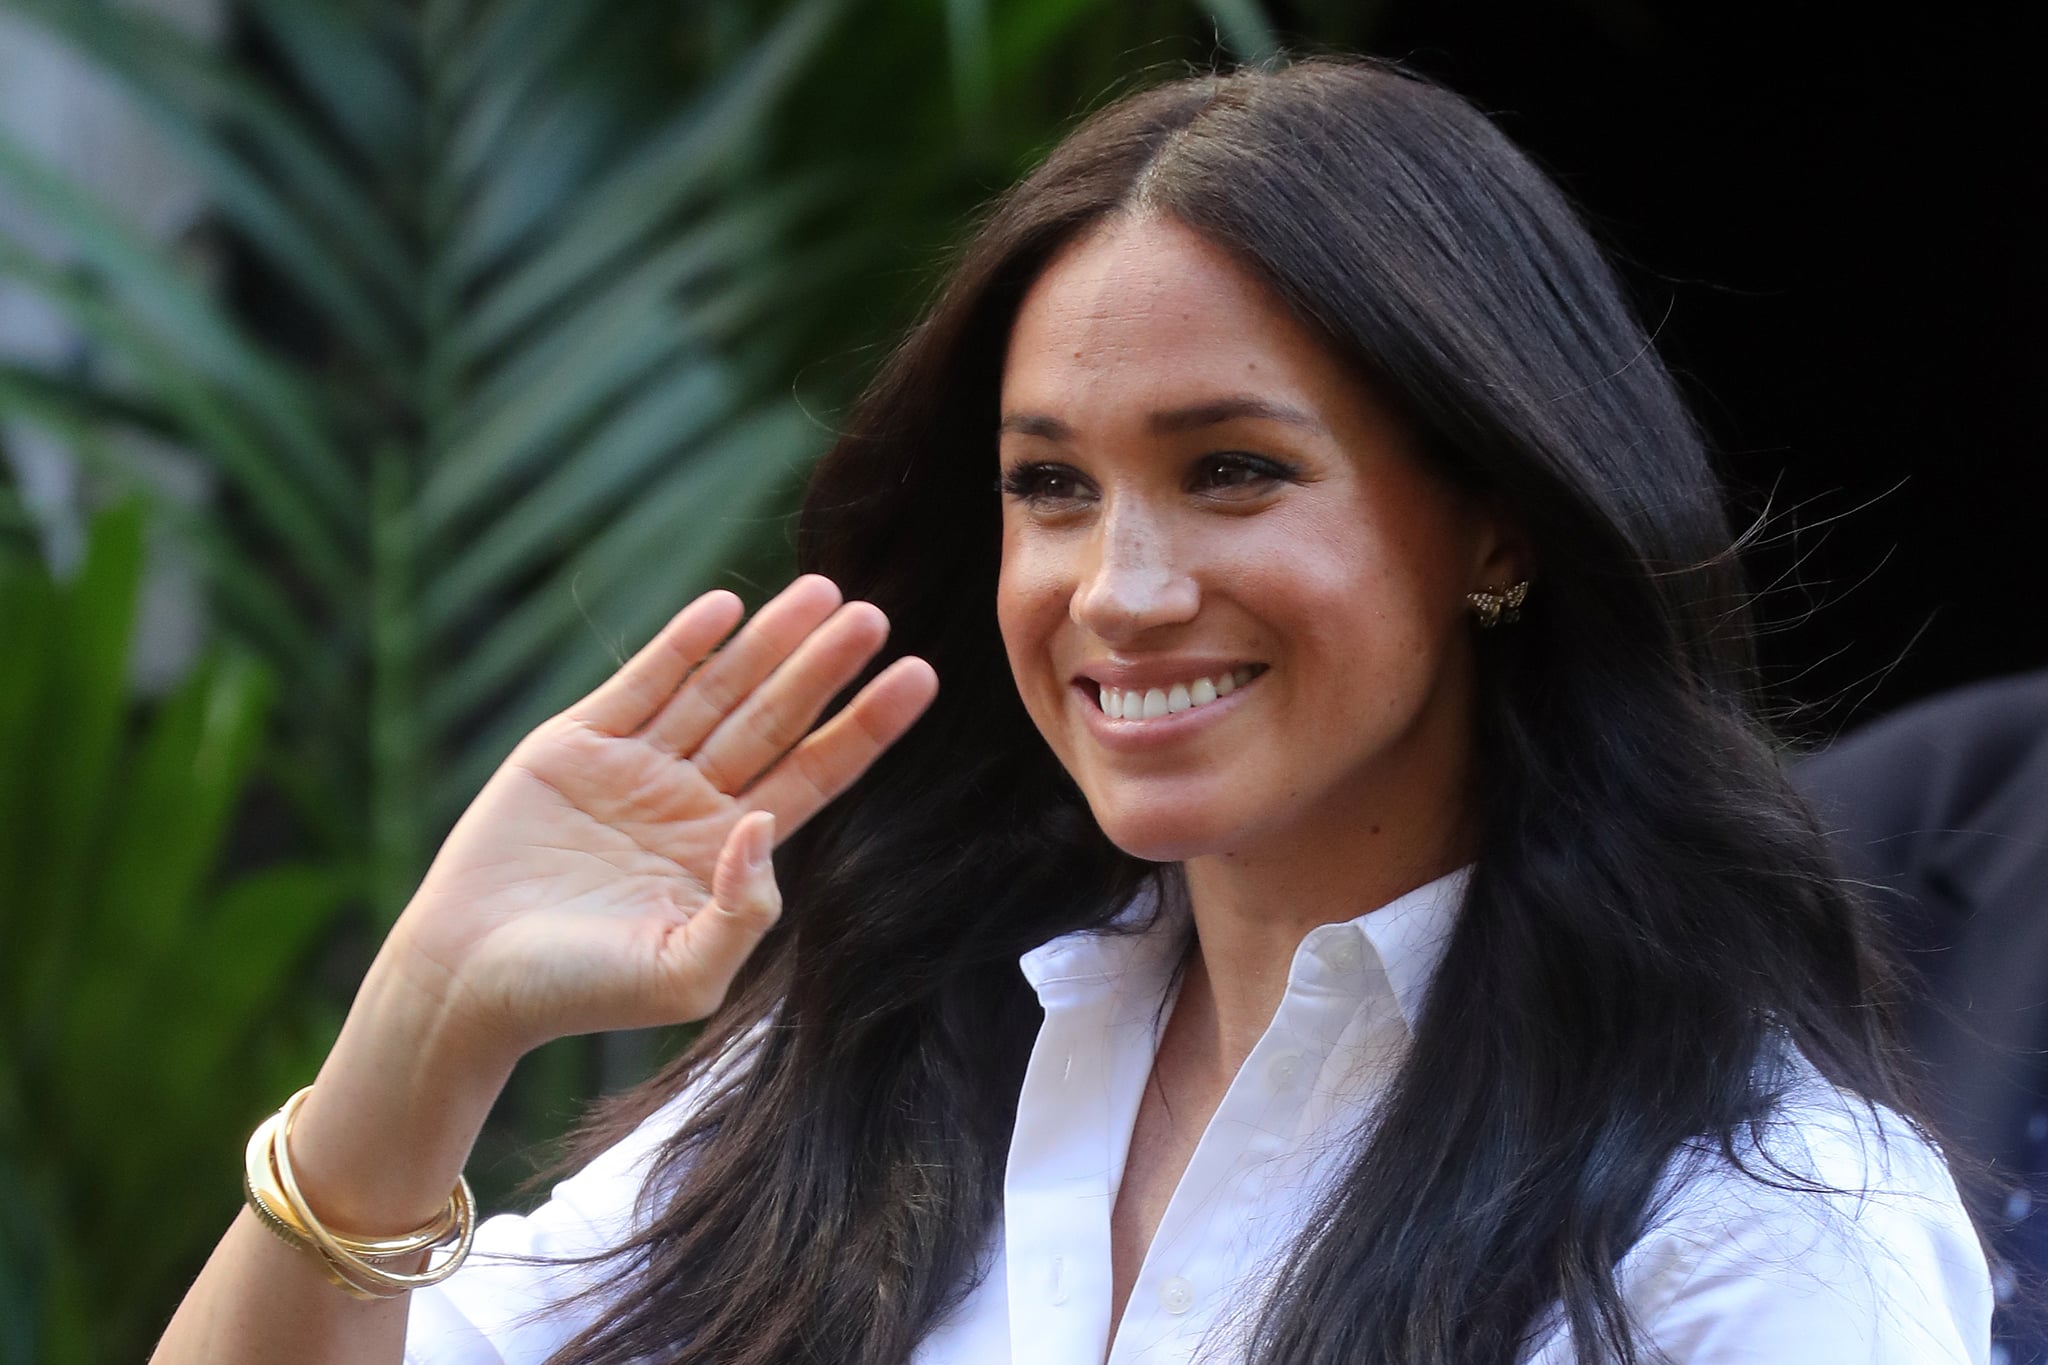 LONDON, ENGLAND - SEPTEMBER 12: Meghan, Duchess of Sussex waves after launching the Smart Works capsule collection on September 12, 2019 in London, England. Created in September 2013 Smart Works exists to help unemployed women regain the confidence they need to succeed at job interviews and return to employment. (Photo by Chris Jackson/Getty Images)